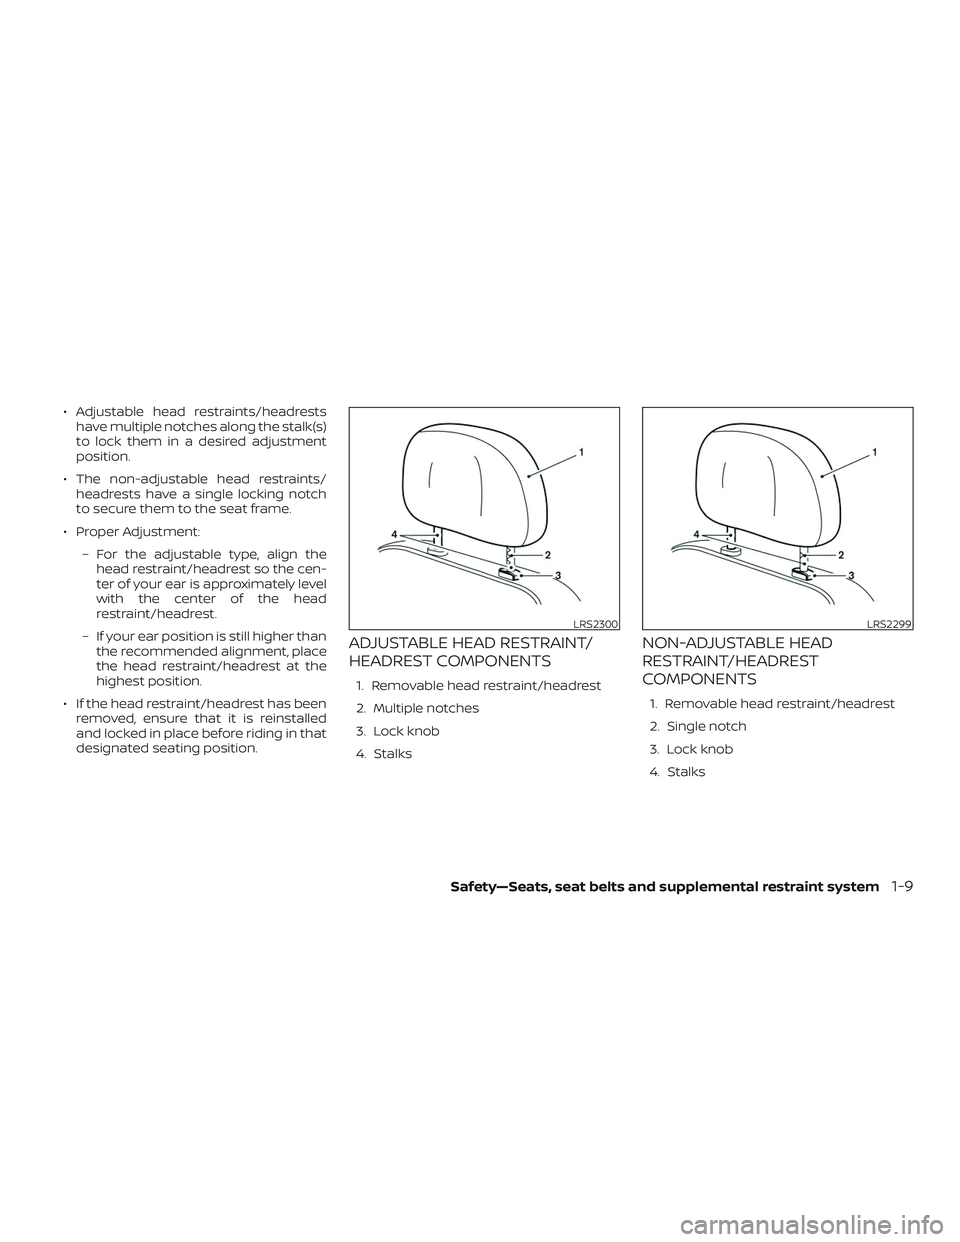 NISSAN ROGUE 2020  Owner´s Manual ∙ Adjustable head restraints/headrestshave multiple notches along the stalk(s)
to lock them in a desired adjustment
position.
∙ The non-adjustable head restraints/ headrests have a single locking 